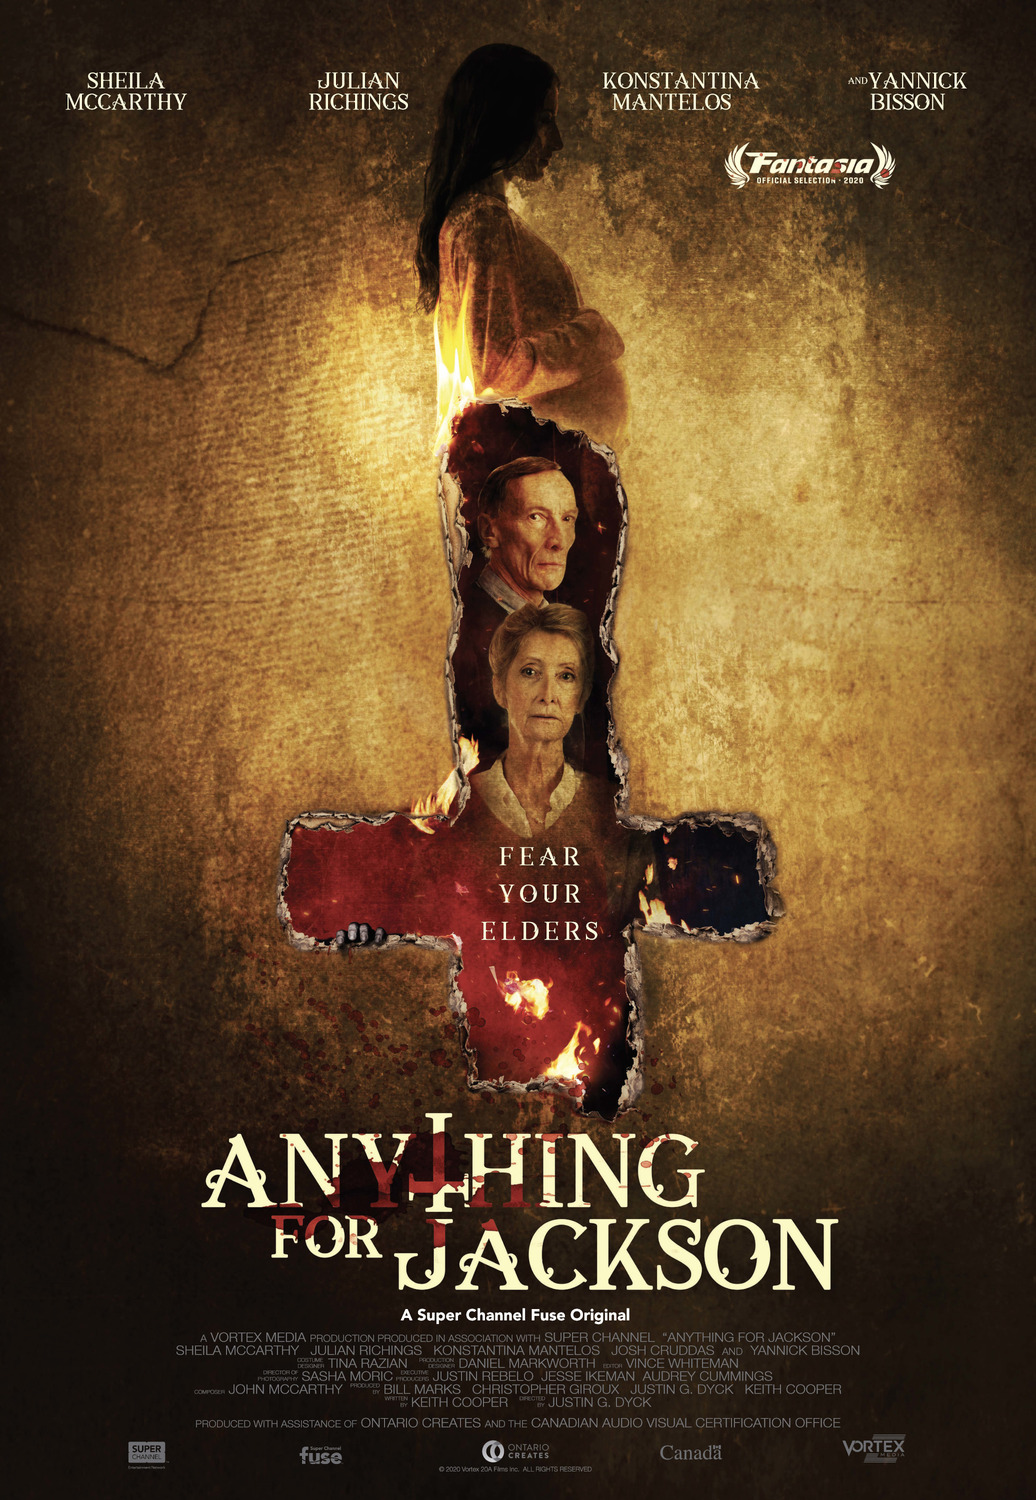 Extra Large Movie Poster Image for Anything for Jackson 